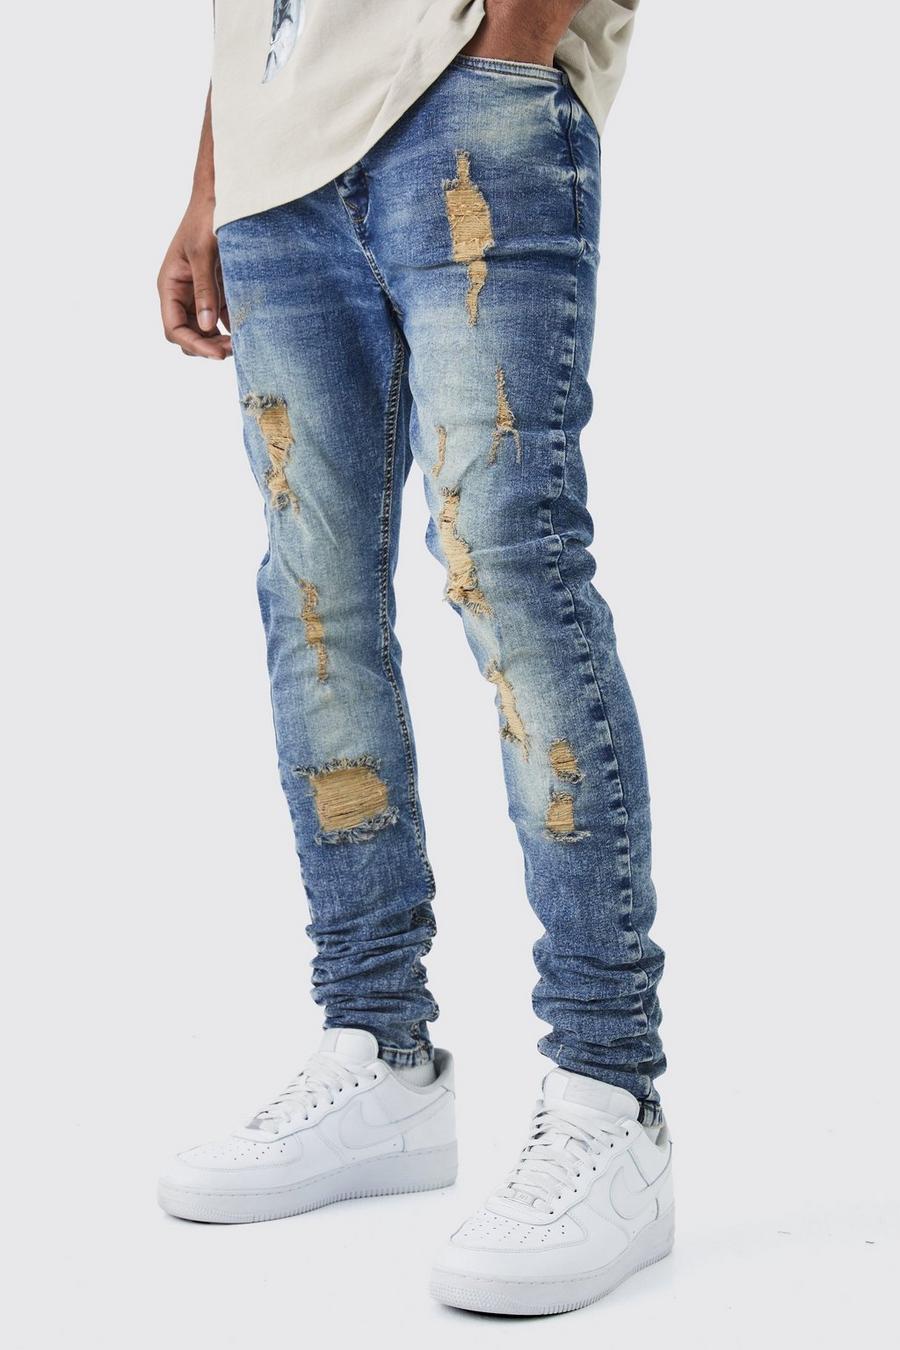 Jeans Tall Skinny Fit Stretch strappati, Antique blue